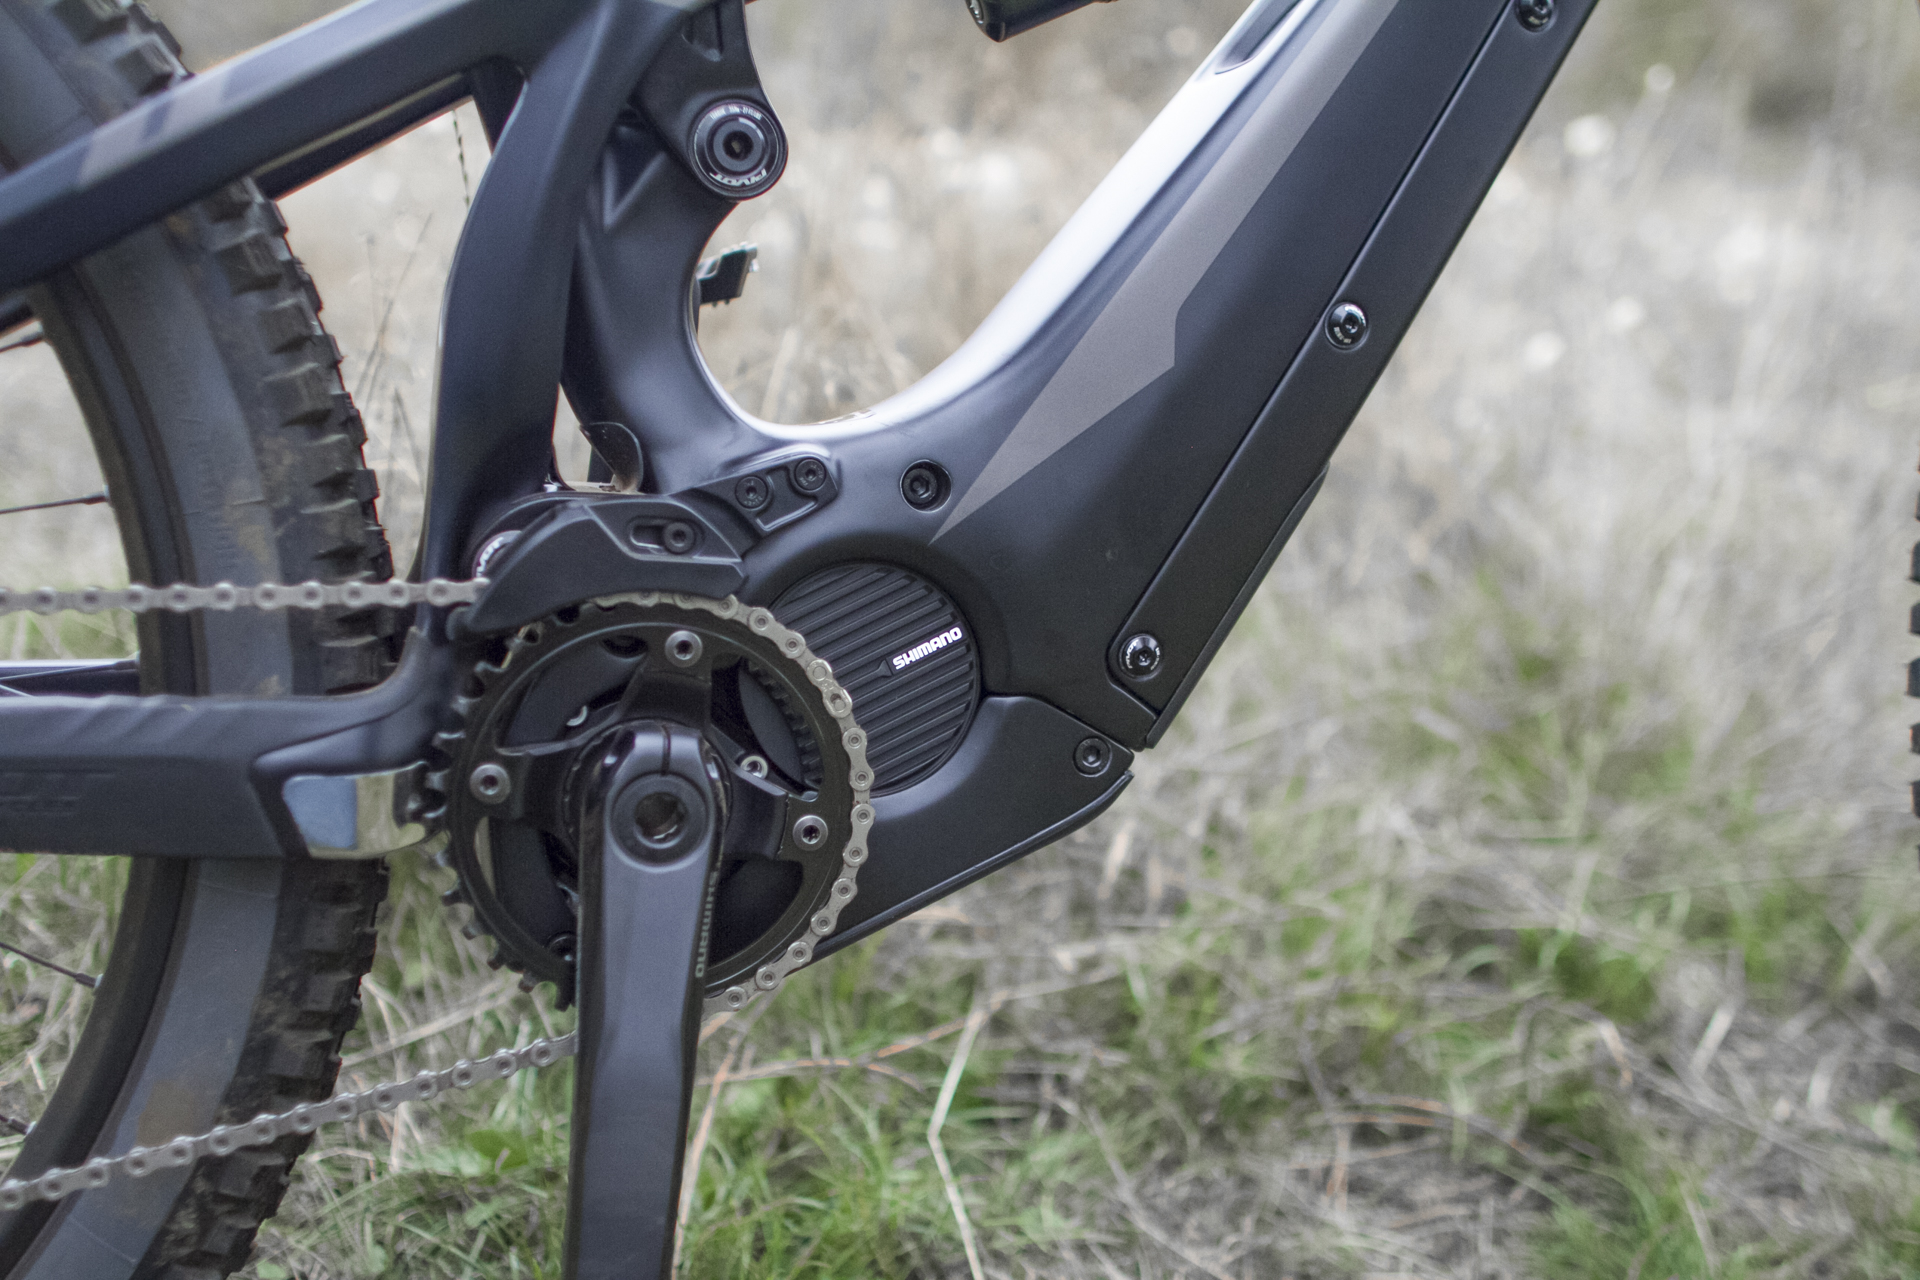 Shimano electric mountain bike components impressions